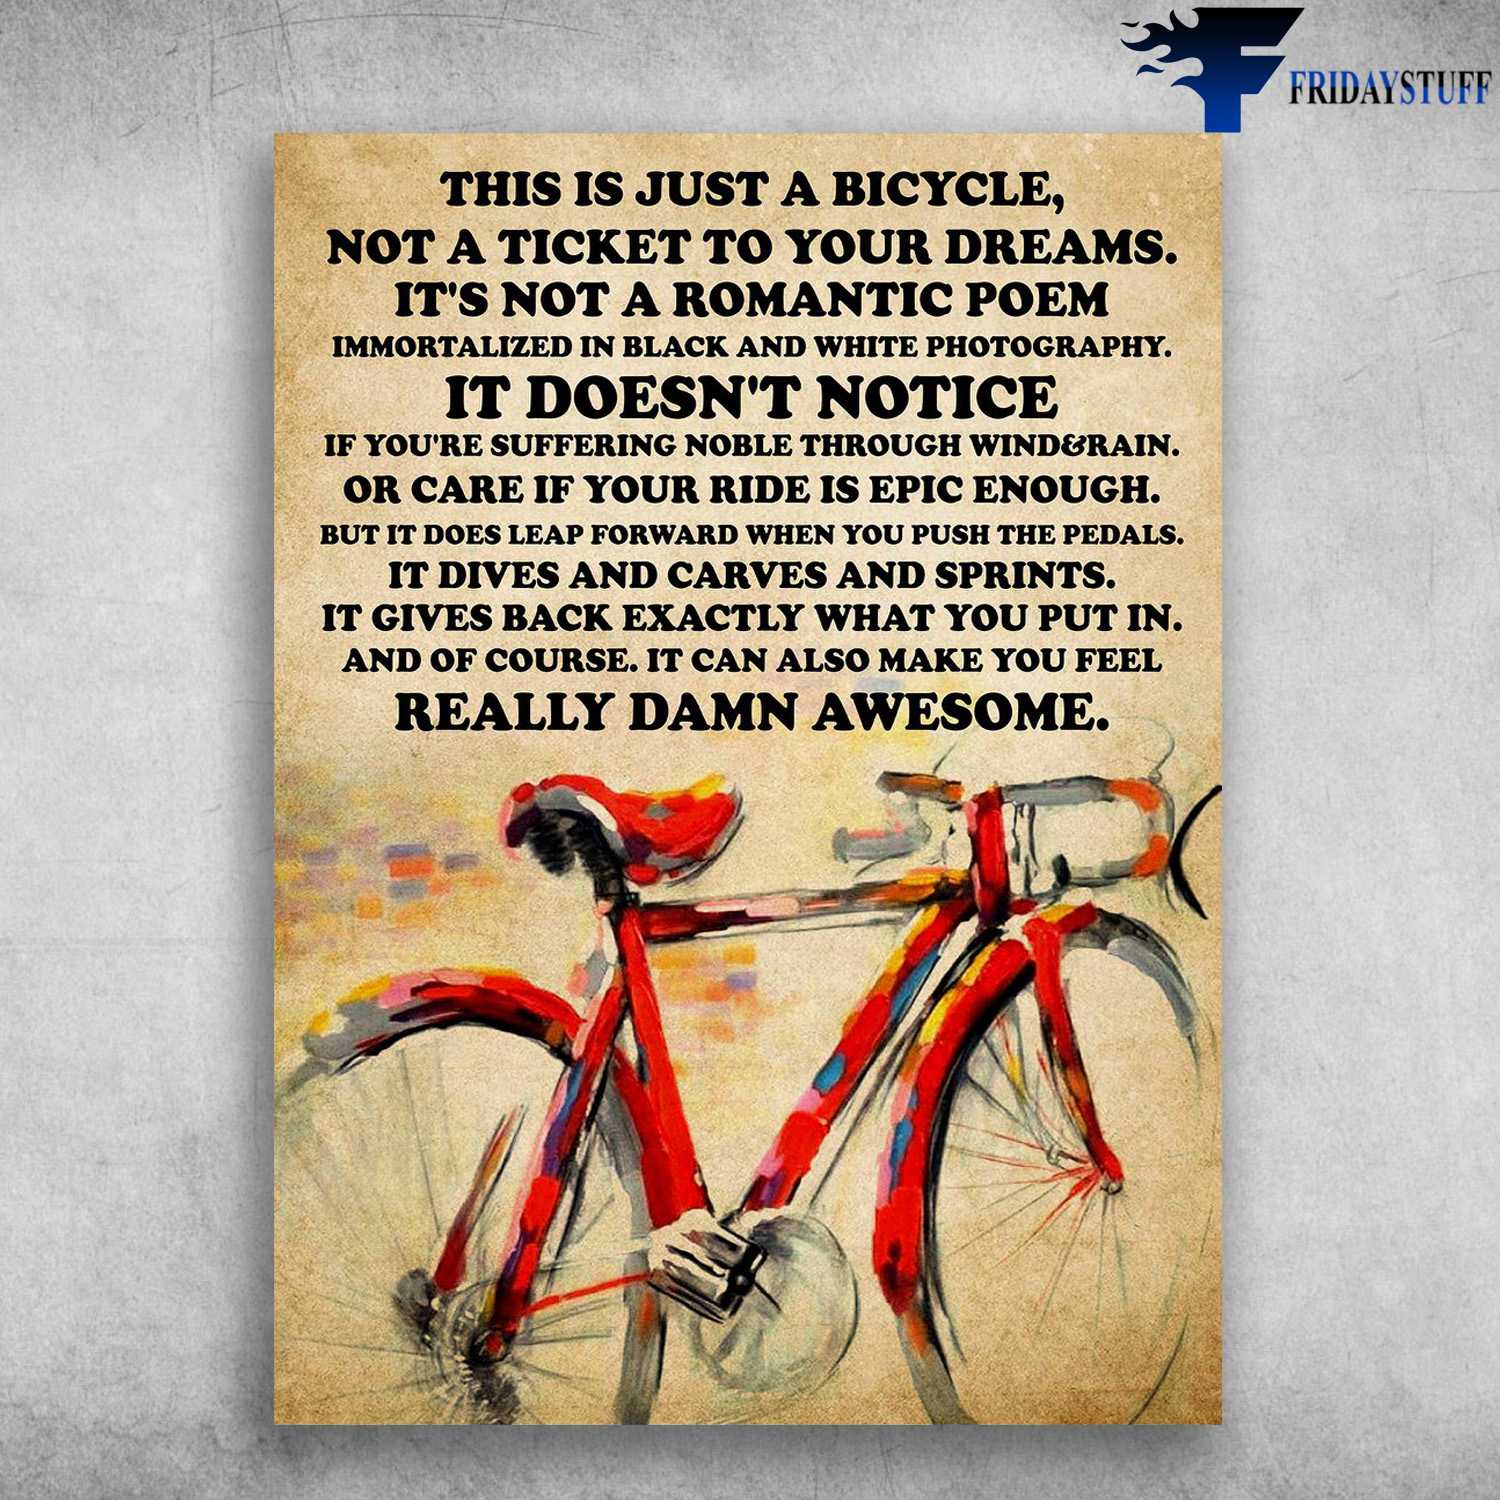 Cycling Poster, Bicycle Lover - This Is Just A Bicycle, Not A Ticket To Your Dreams, It's Not A Romantic Poem, Immortalized In Black And White Photography, It Doesn't Notice